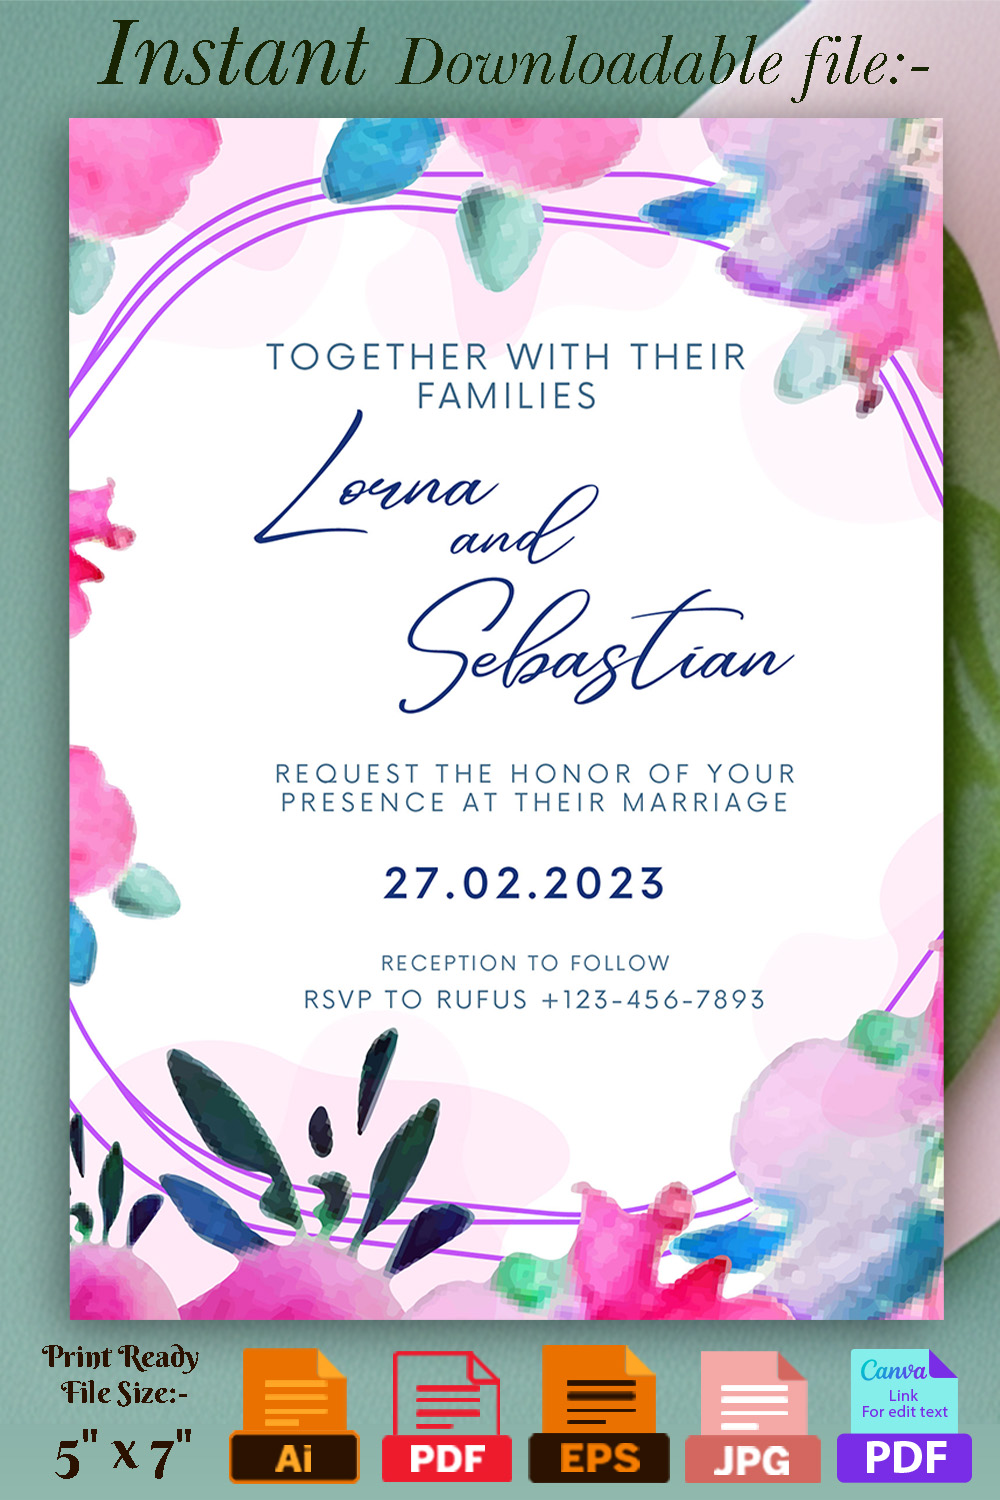 Image with enchanting wedding invitation card with floral background.